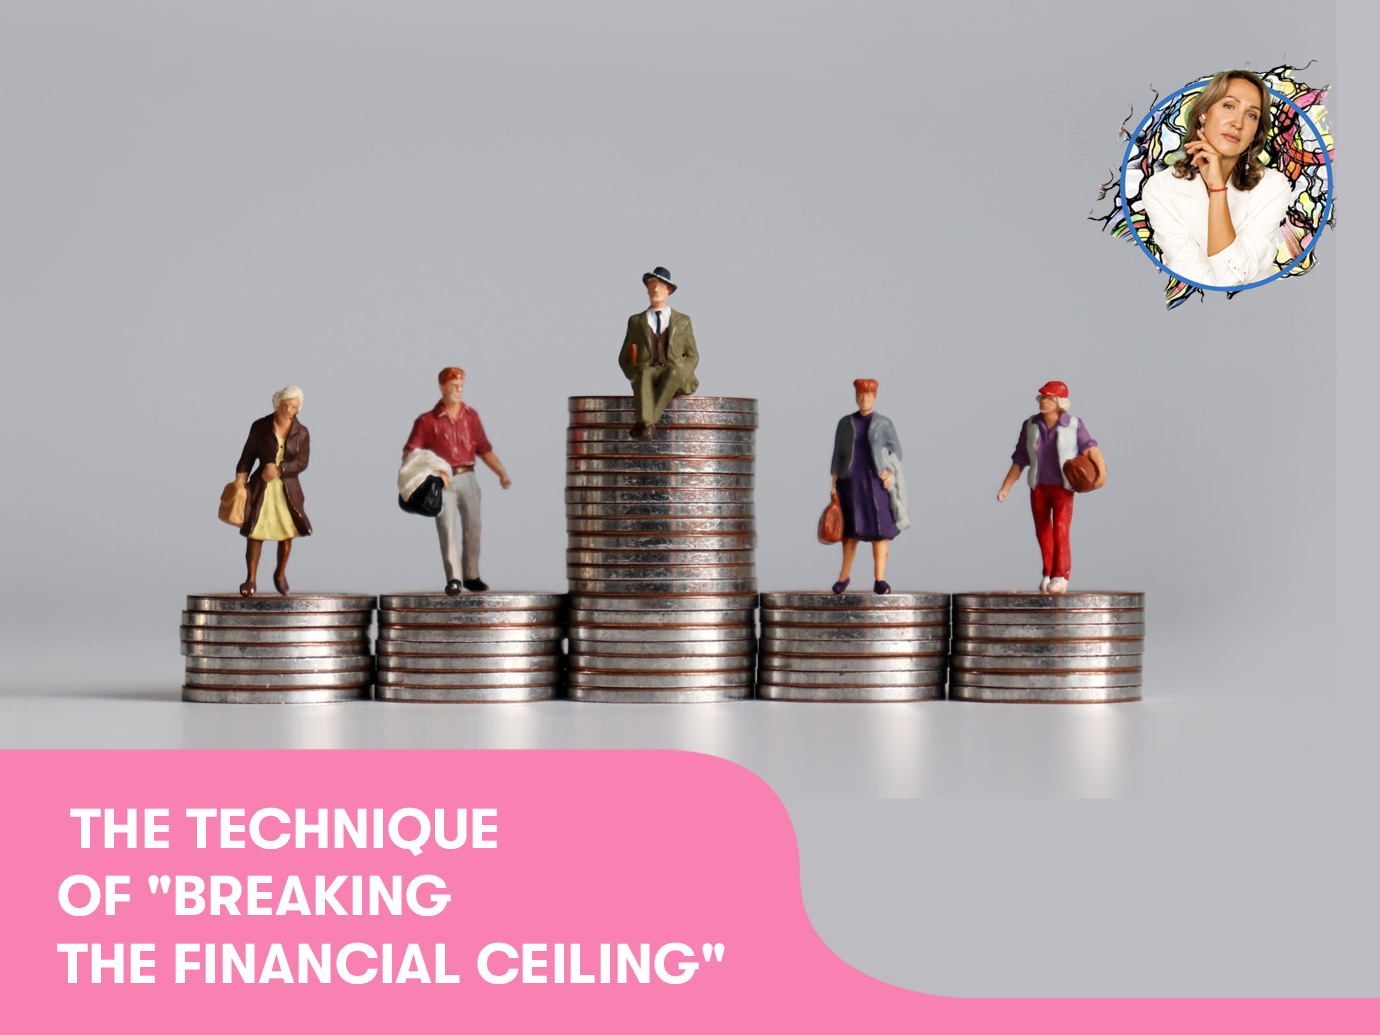 The technique of “Breaking the financial ceiling“